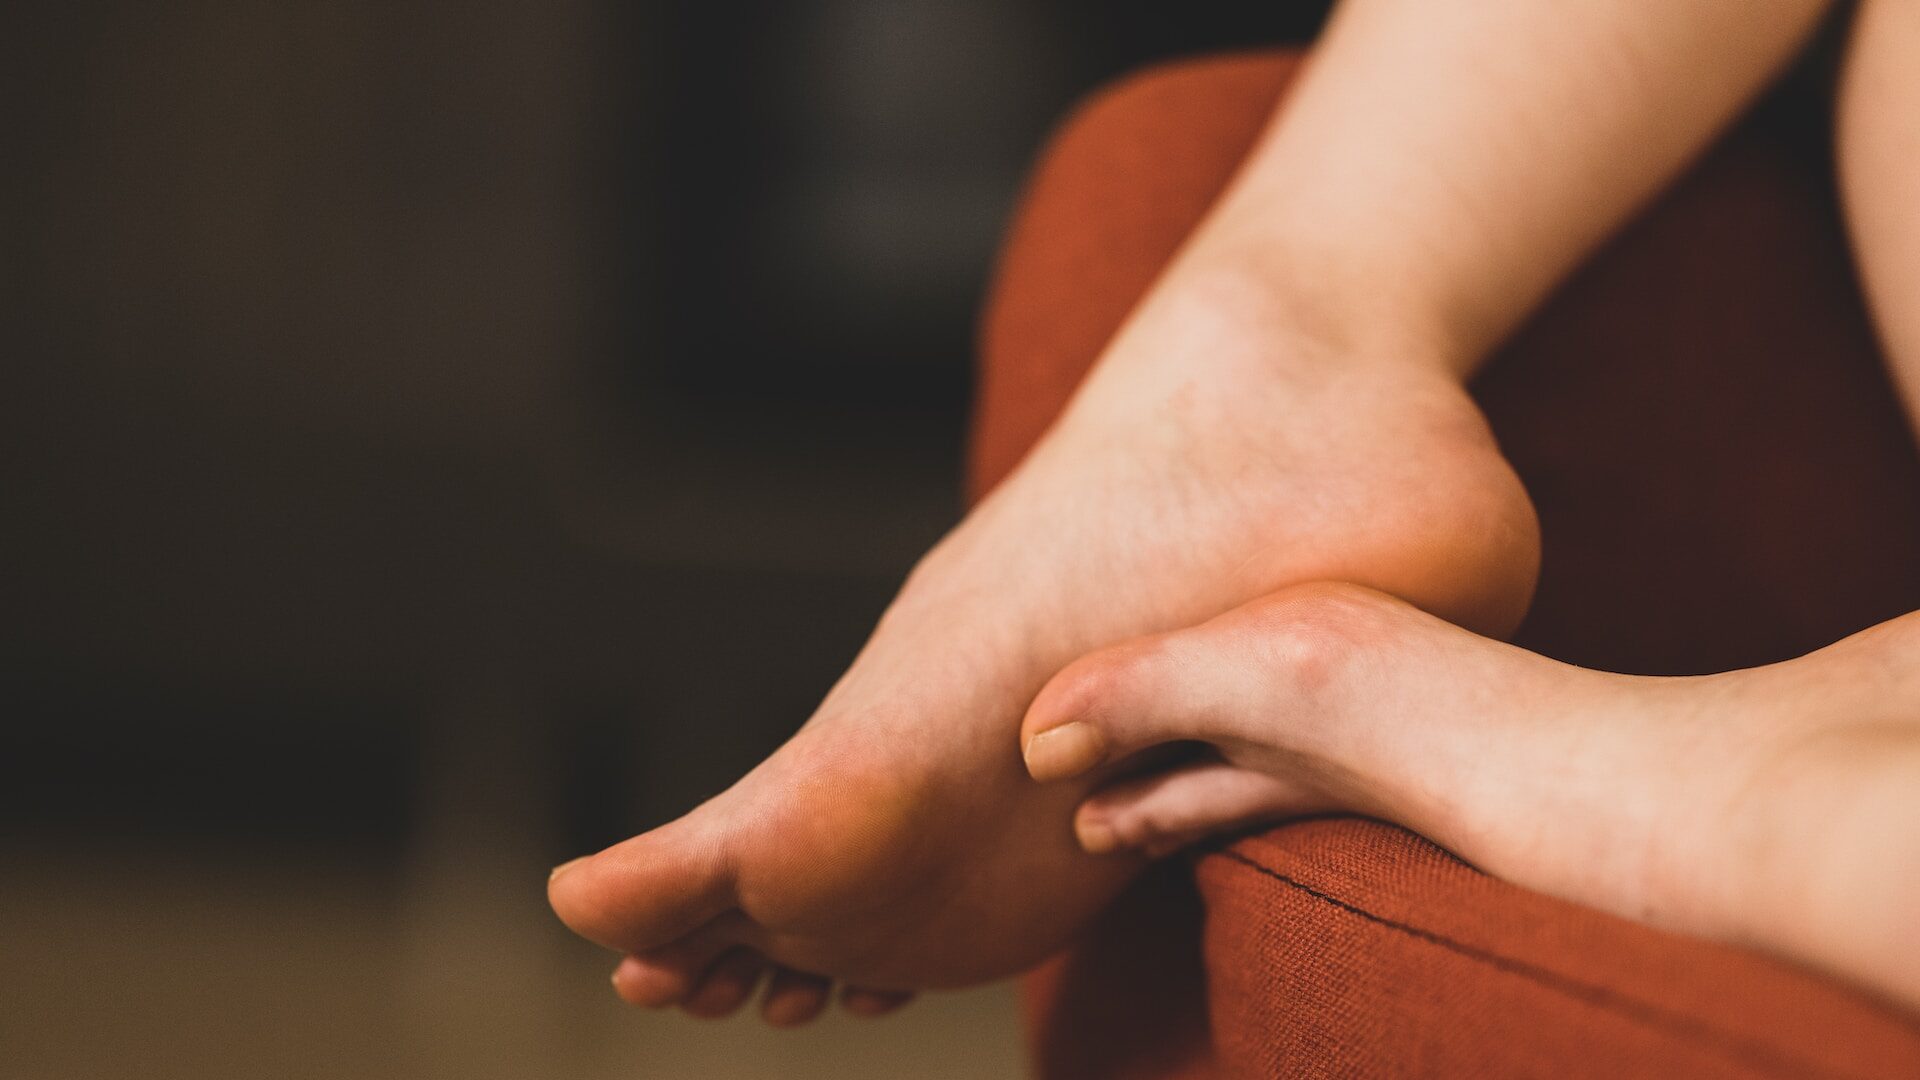 Morton's Neuroma: What Is, Causes, Symptoms, Diagnosis, and Treatment